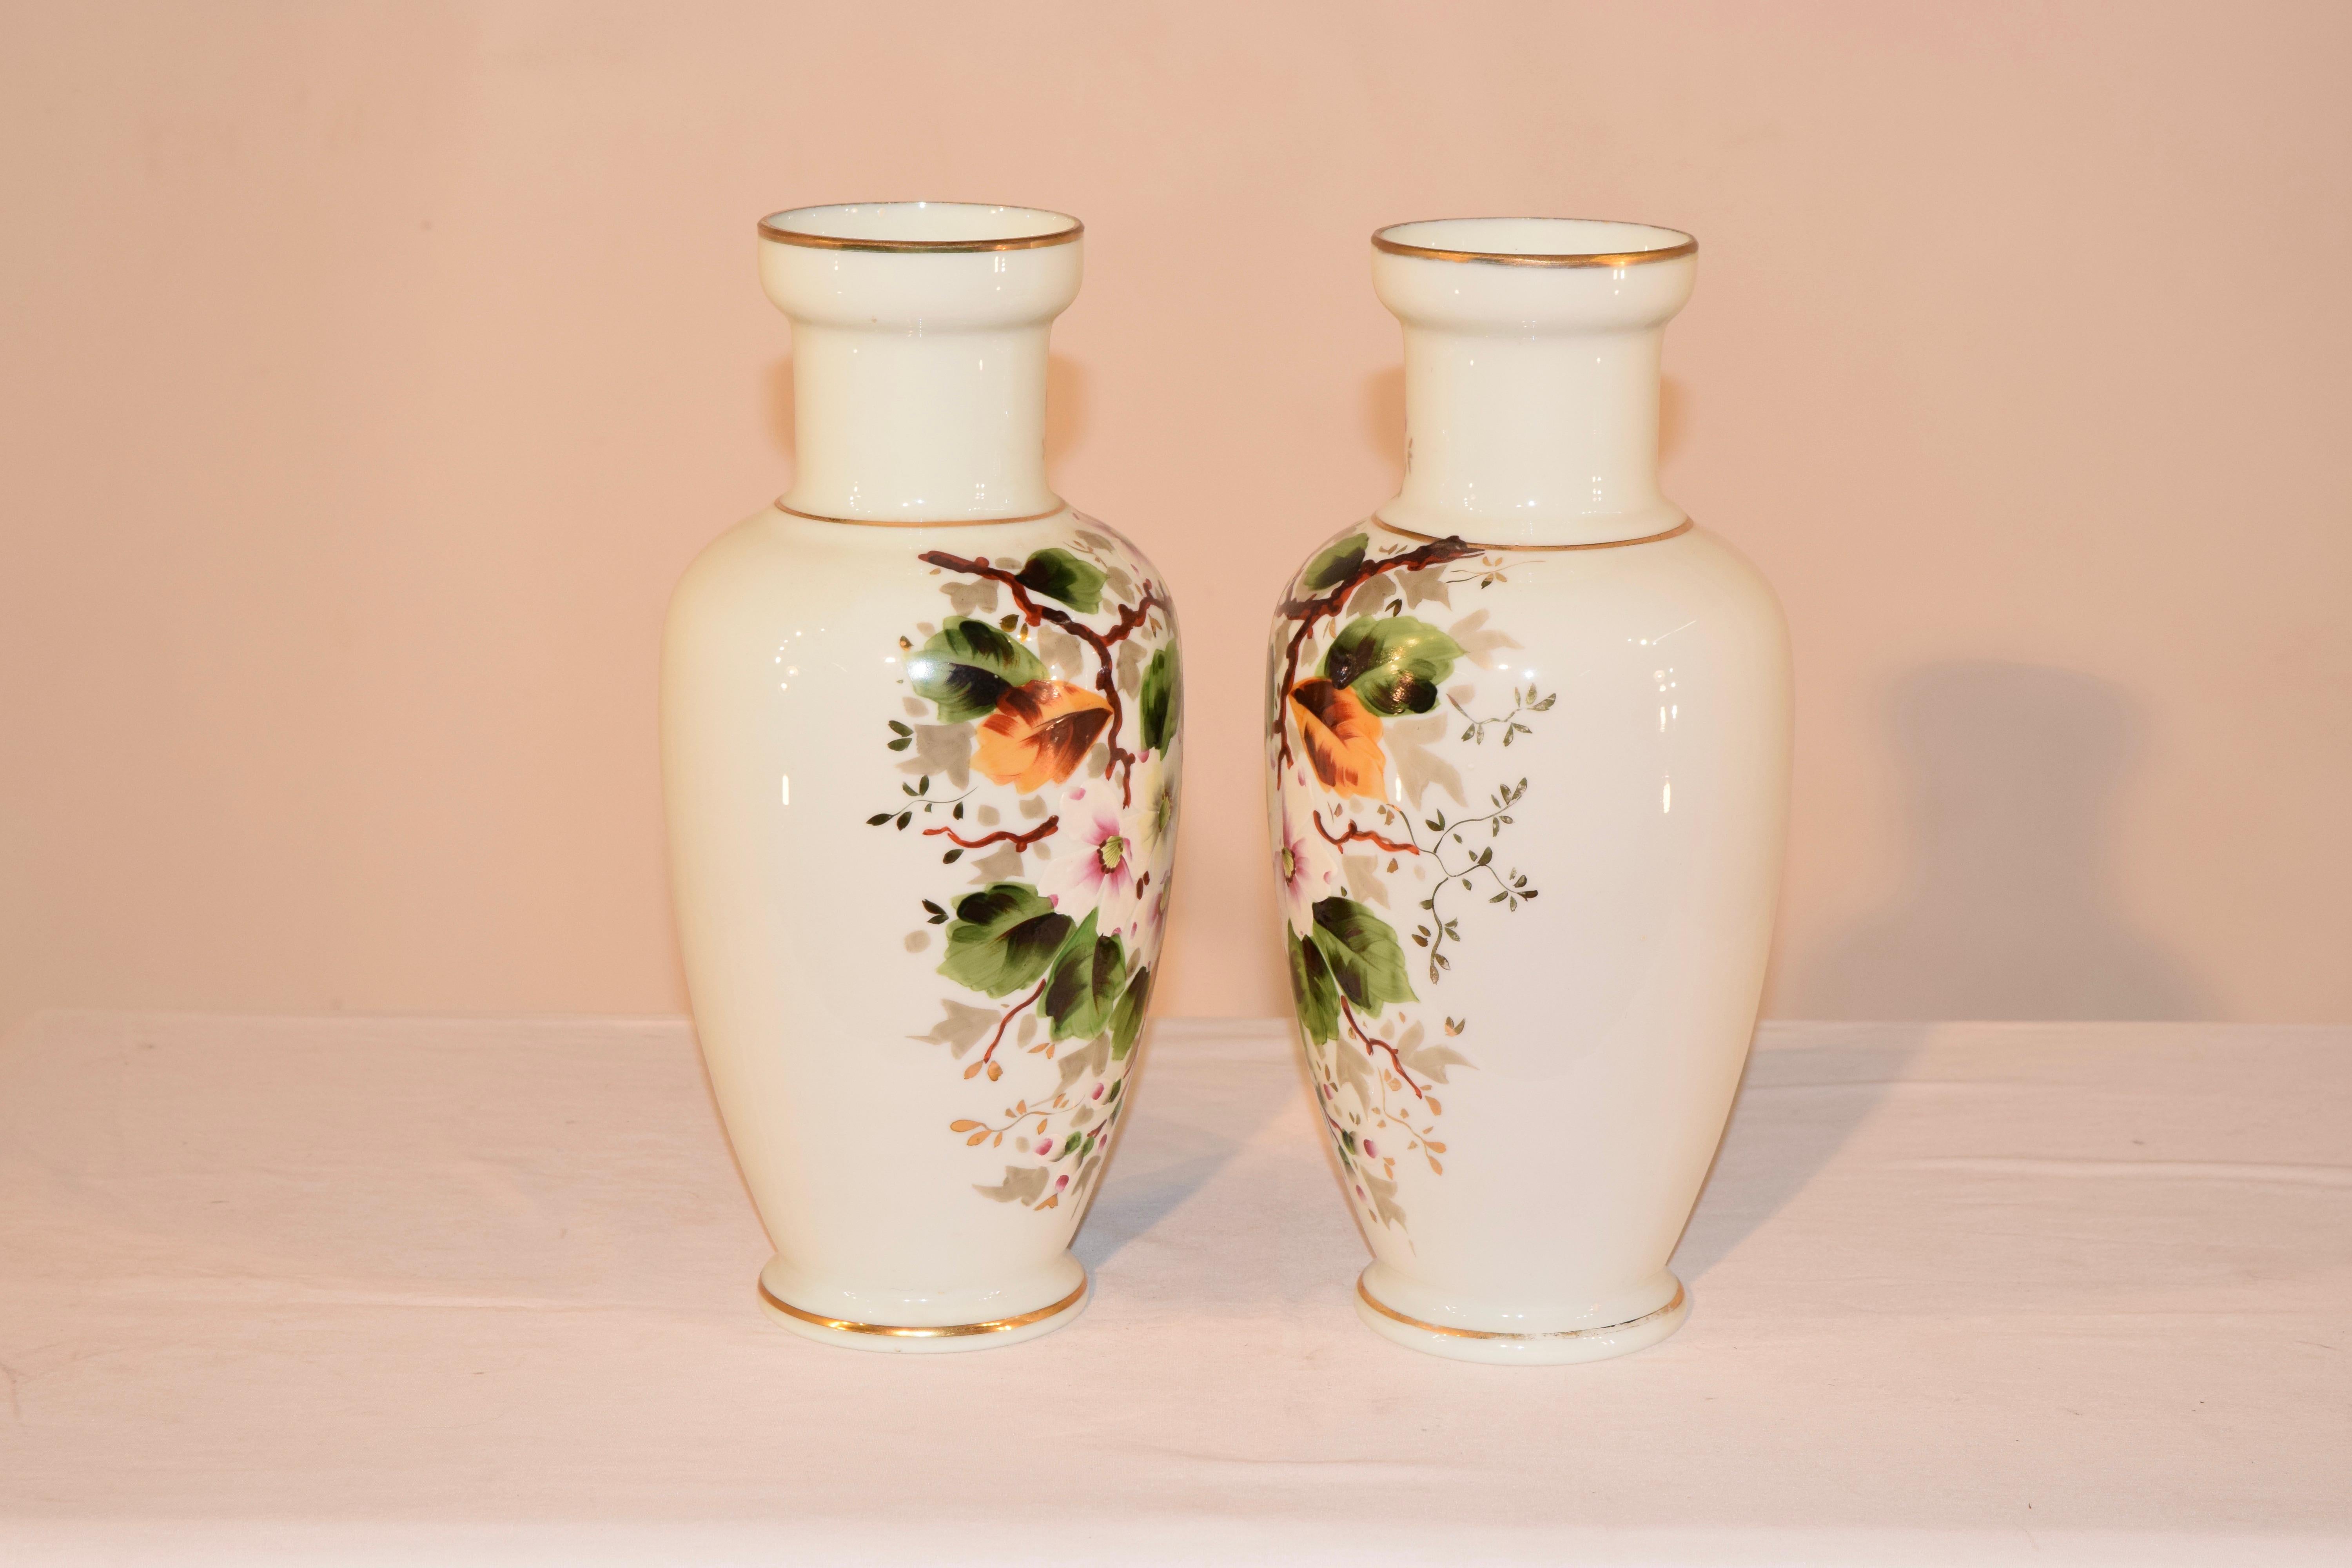 Pair of late 19th century Opaline glass vases from France. they are wonderfully shaped and have lovely floral and vine hand painted decoration.